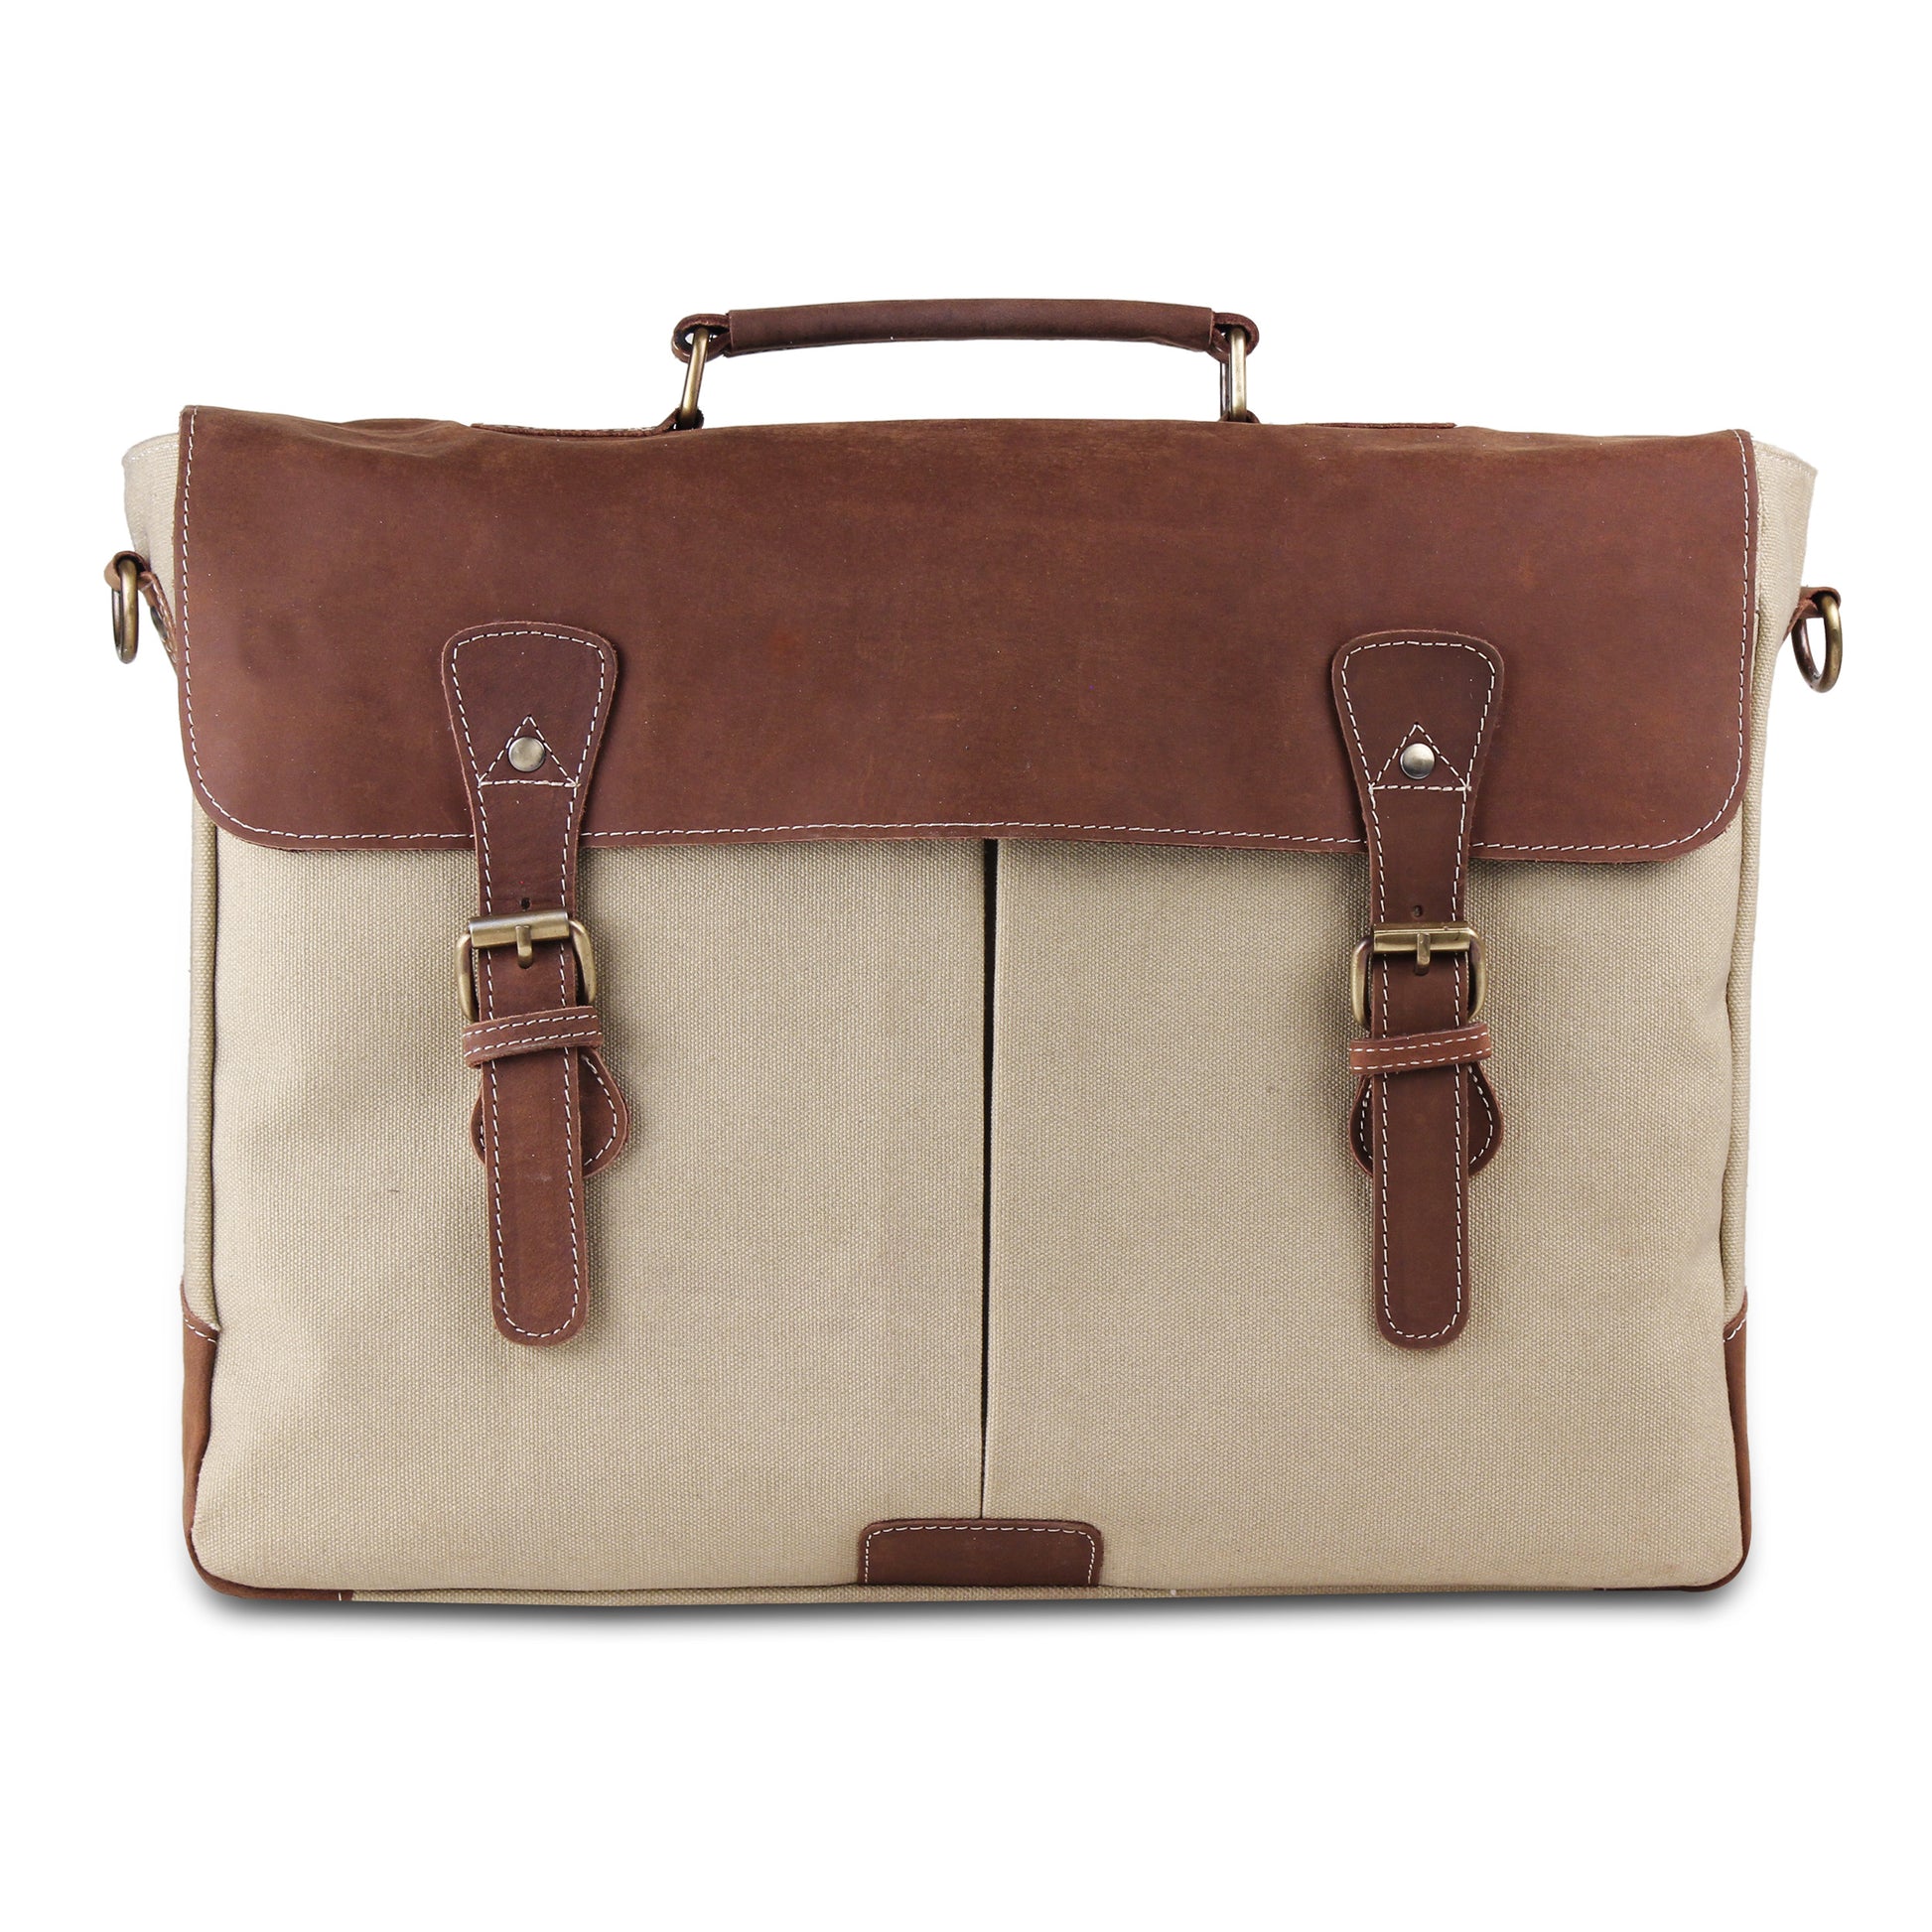 Large Genuine Full Grain Leather Canvas Briefcase Bag with Top Handle - Cream